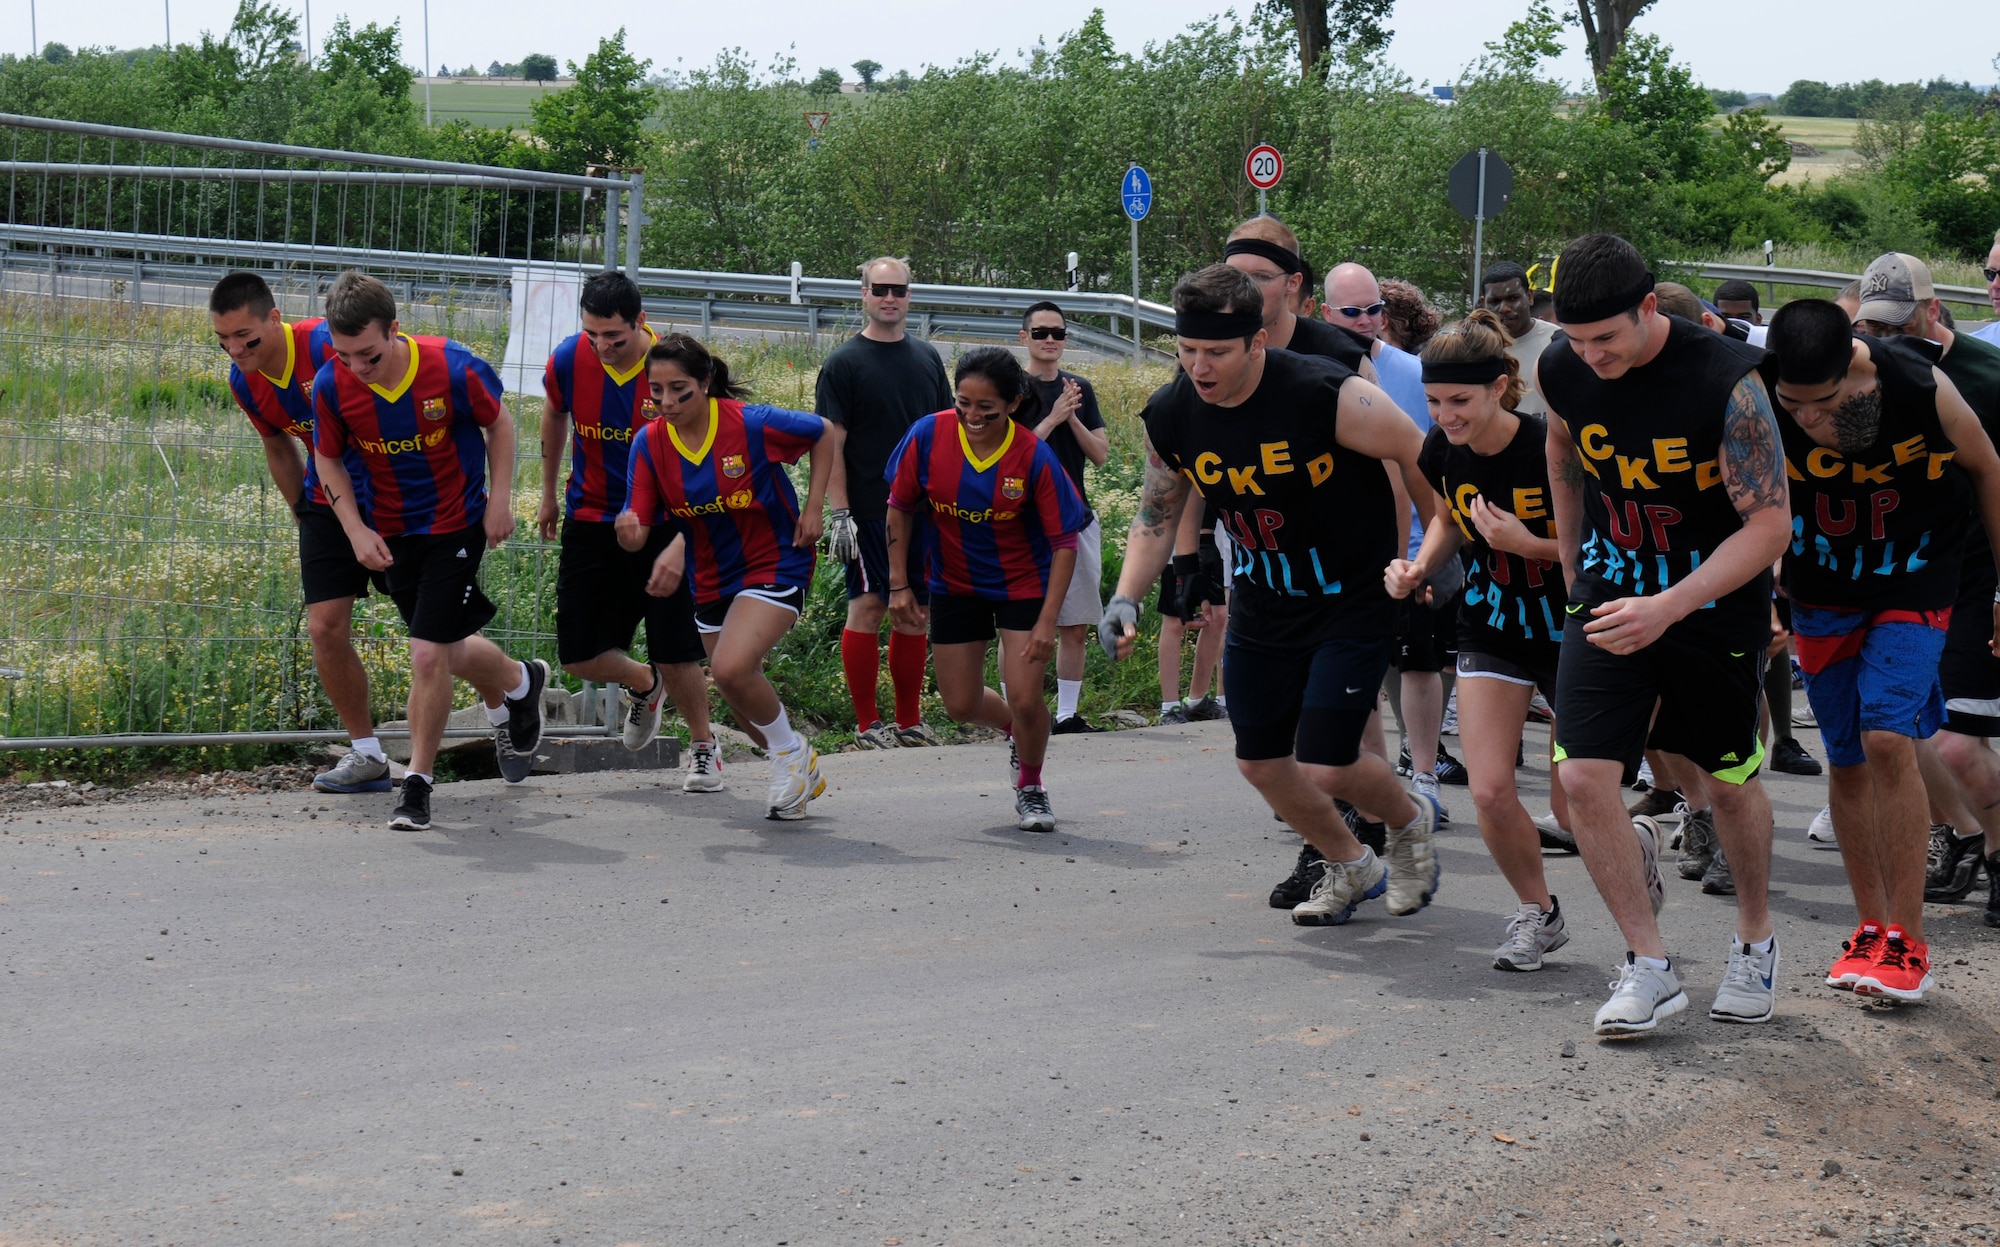 SPANGDAHLEM AIR BASE, Germany – Competitors sprint from the starting line during the Saber Endurance Challenge here June 3. Teams of five were judged on team creativity, guessing their time and money raised. Students from Bitburg High School guessed their time closest within four minutes of estimated completion. Team Soup Kitchen from the 52nd Equipment Maintenance Squadron was awarded most creative, and Team MDSS from the 52nd Medical Group raised the most money. The challenge was hosted by the Tier II council and raised money for the Wounded Warrior Project at Landstuhl Regional Medical Center, Germany. (U.S. Air Force photo/Airman 1st Class Brittney Frees)